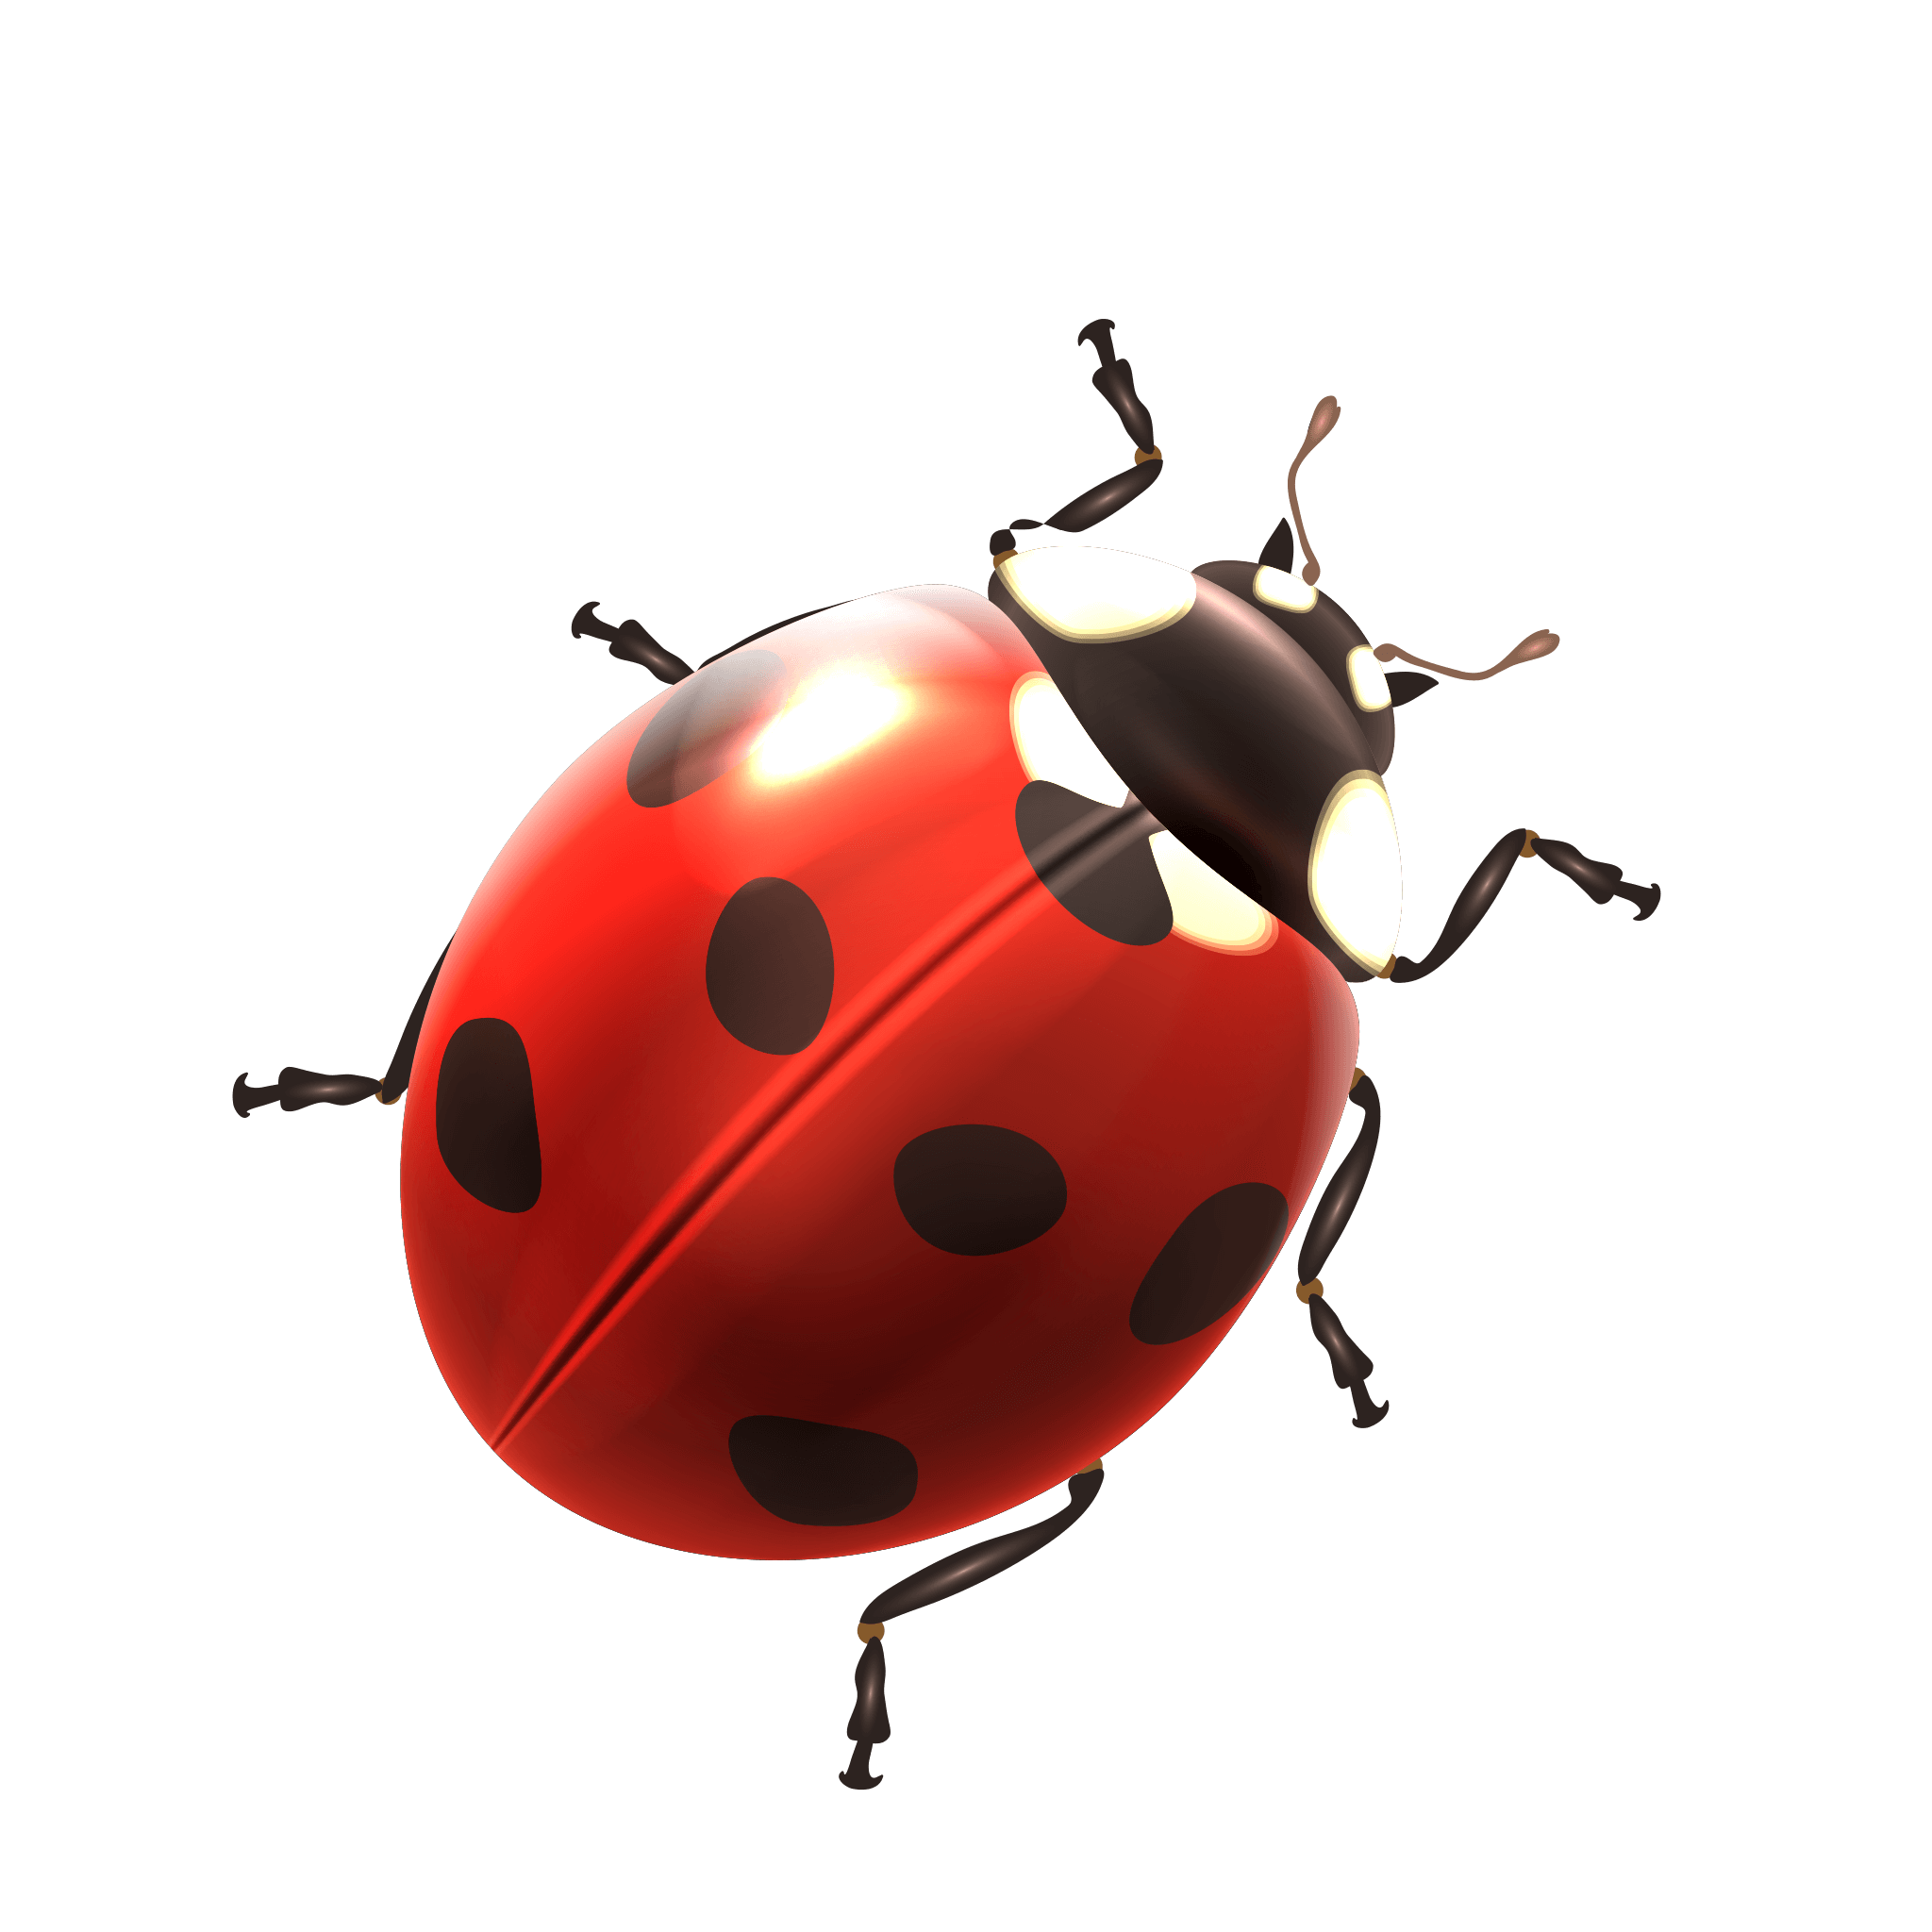 Ladybird PNG Images HD